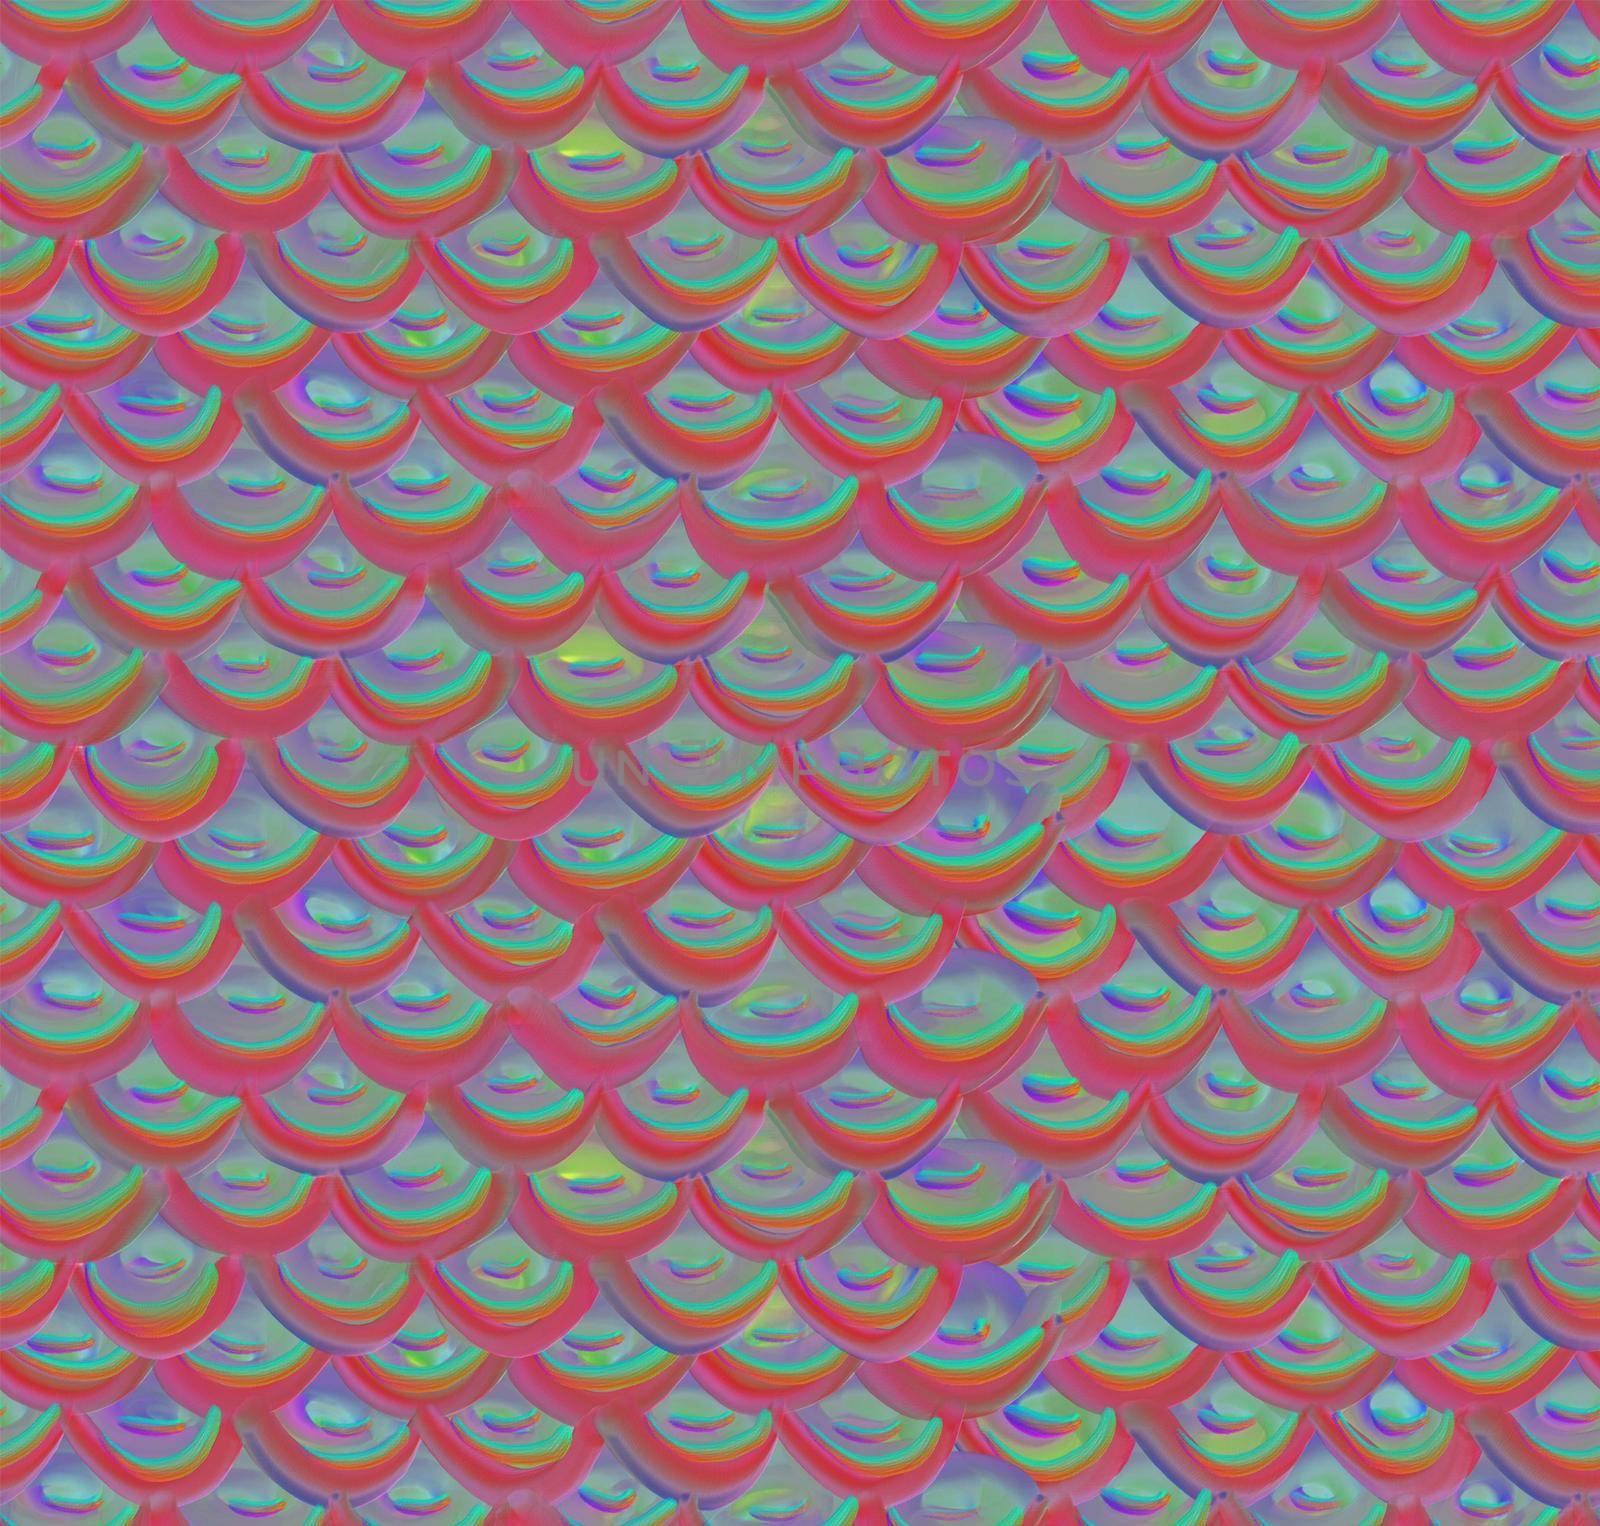 Seamless pattern. Red scales of a fish or a mermaid. With a mother-of-pearl effect.